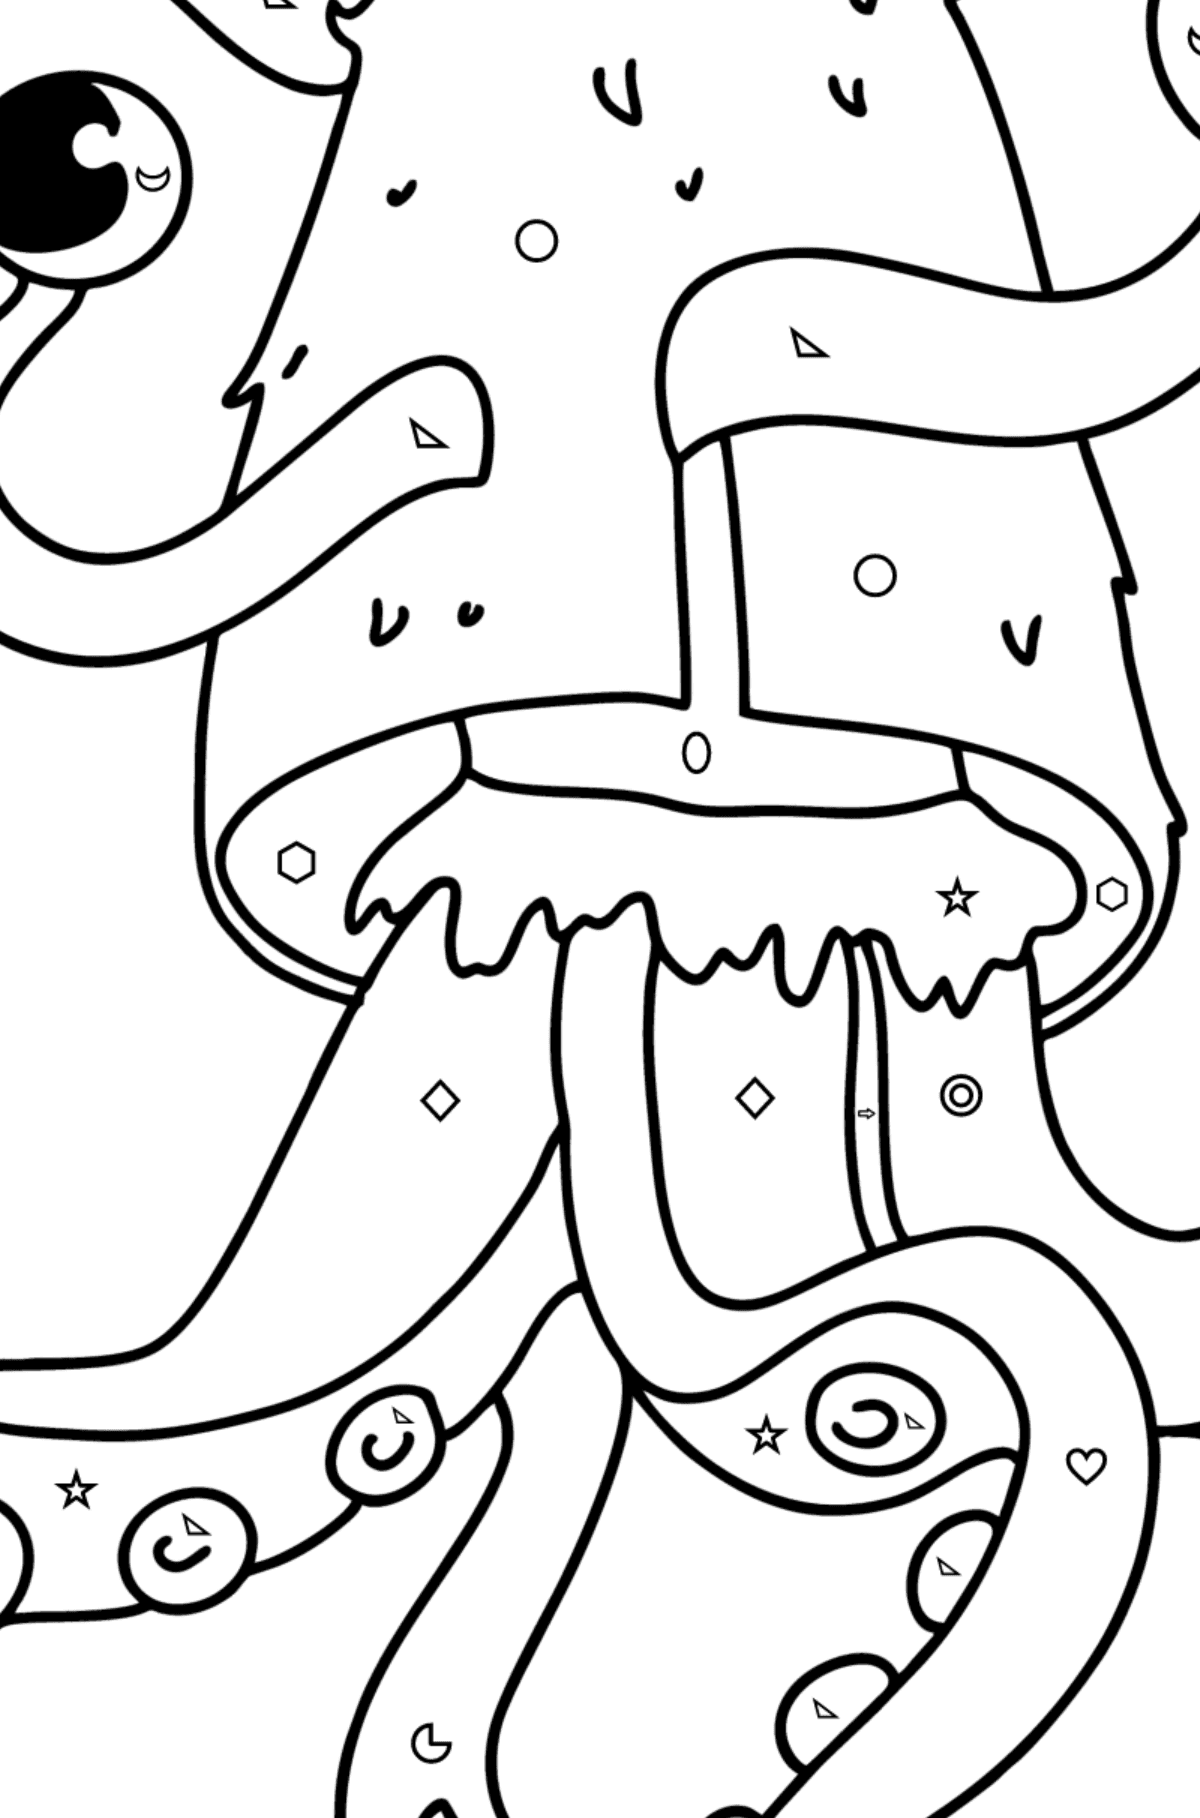 Monster Alien coloring page - Coloring by Geometric Shapes for Kids